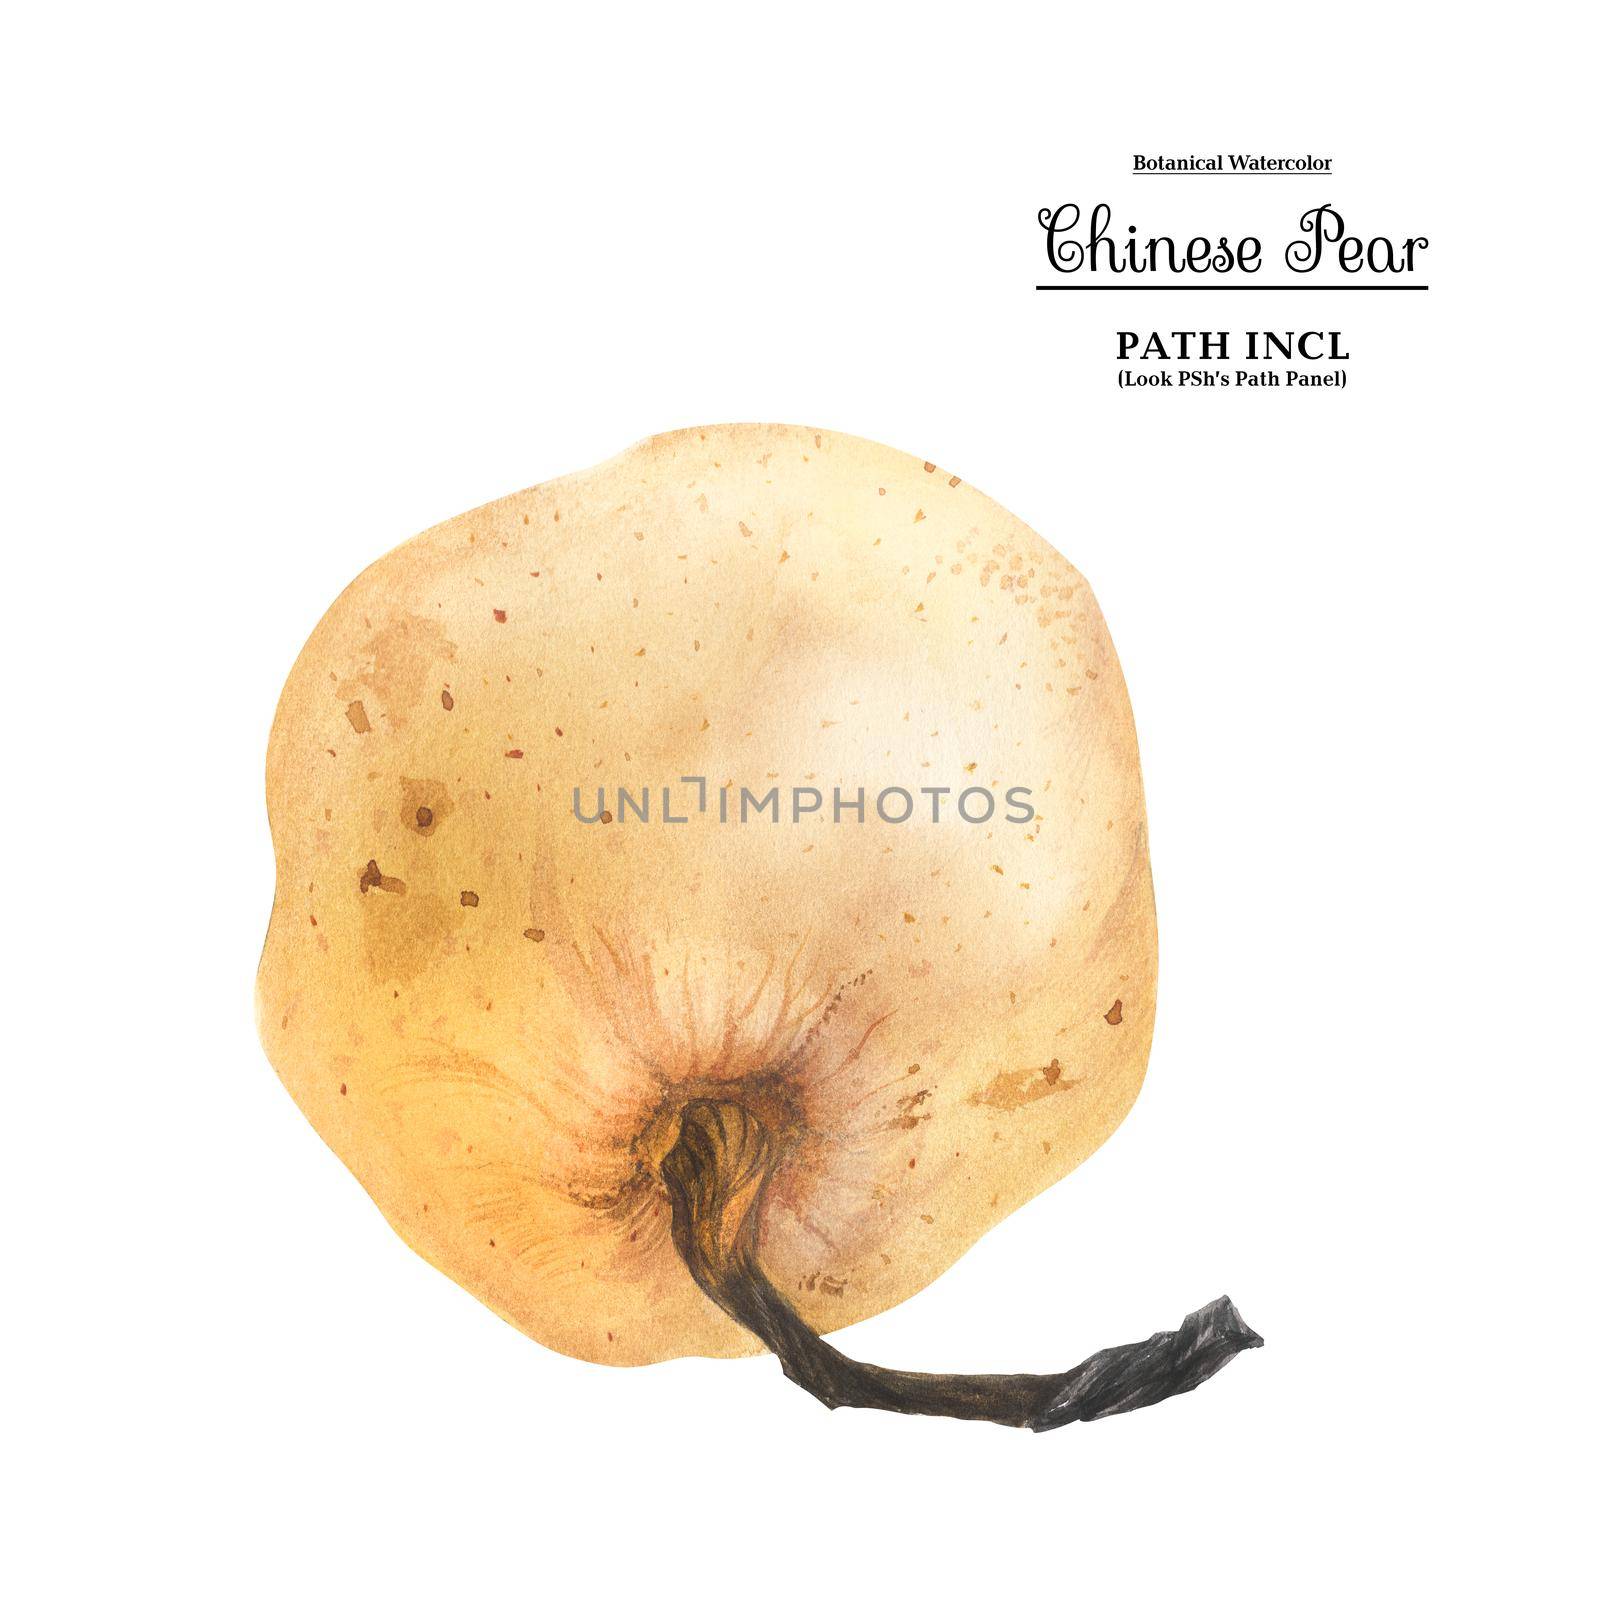 Watercolor botanical illustration. Chinese pear on a white background, path included.